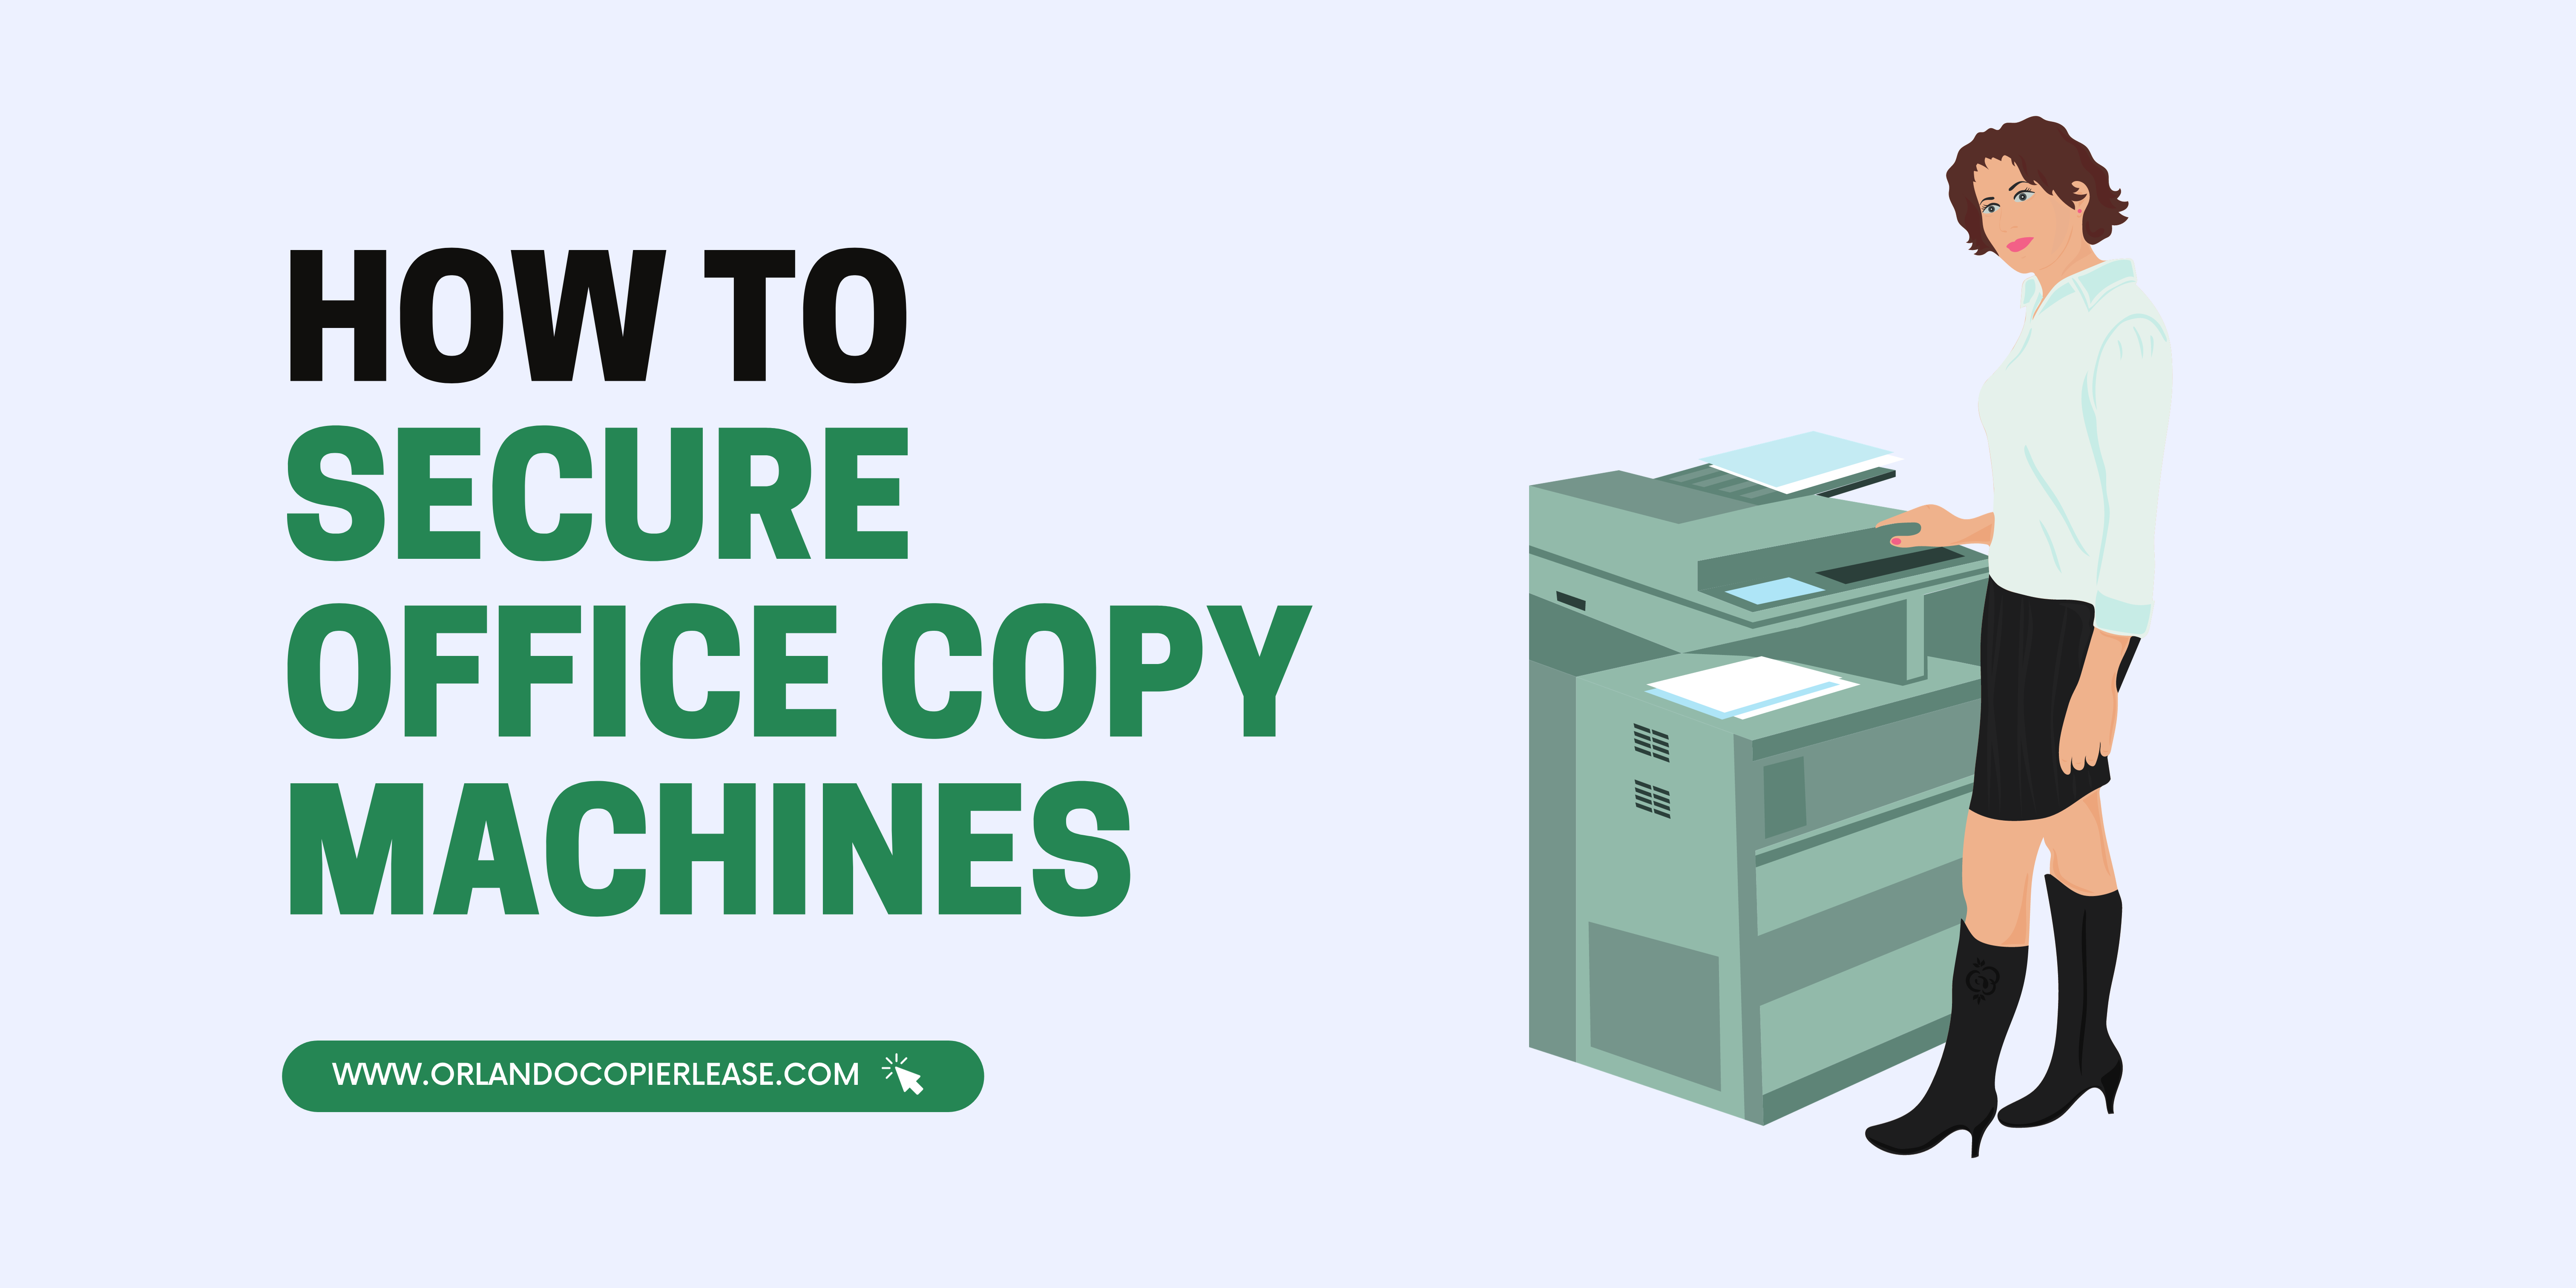 How to Secure Office Copy Machines